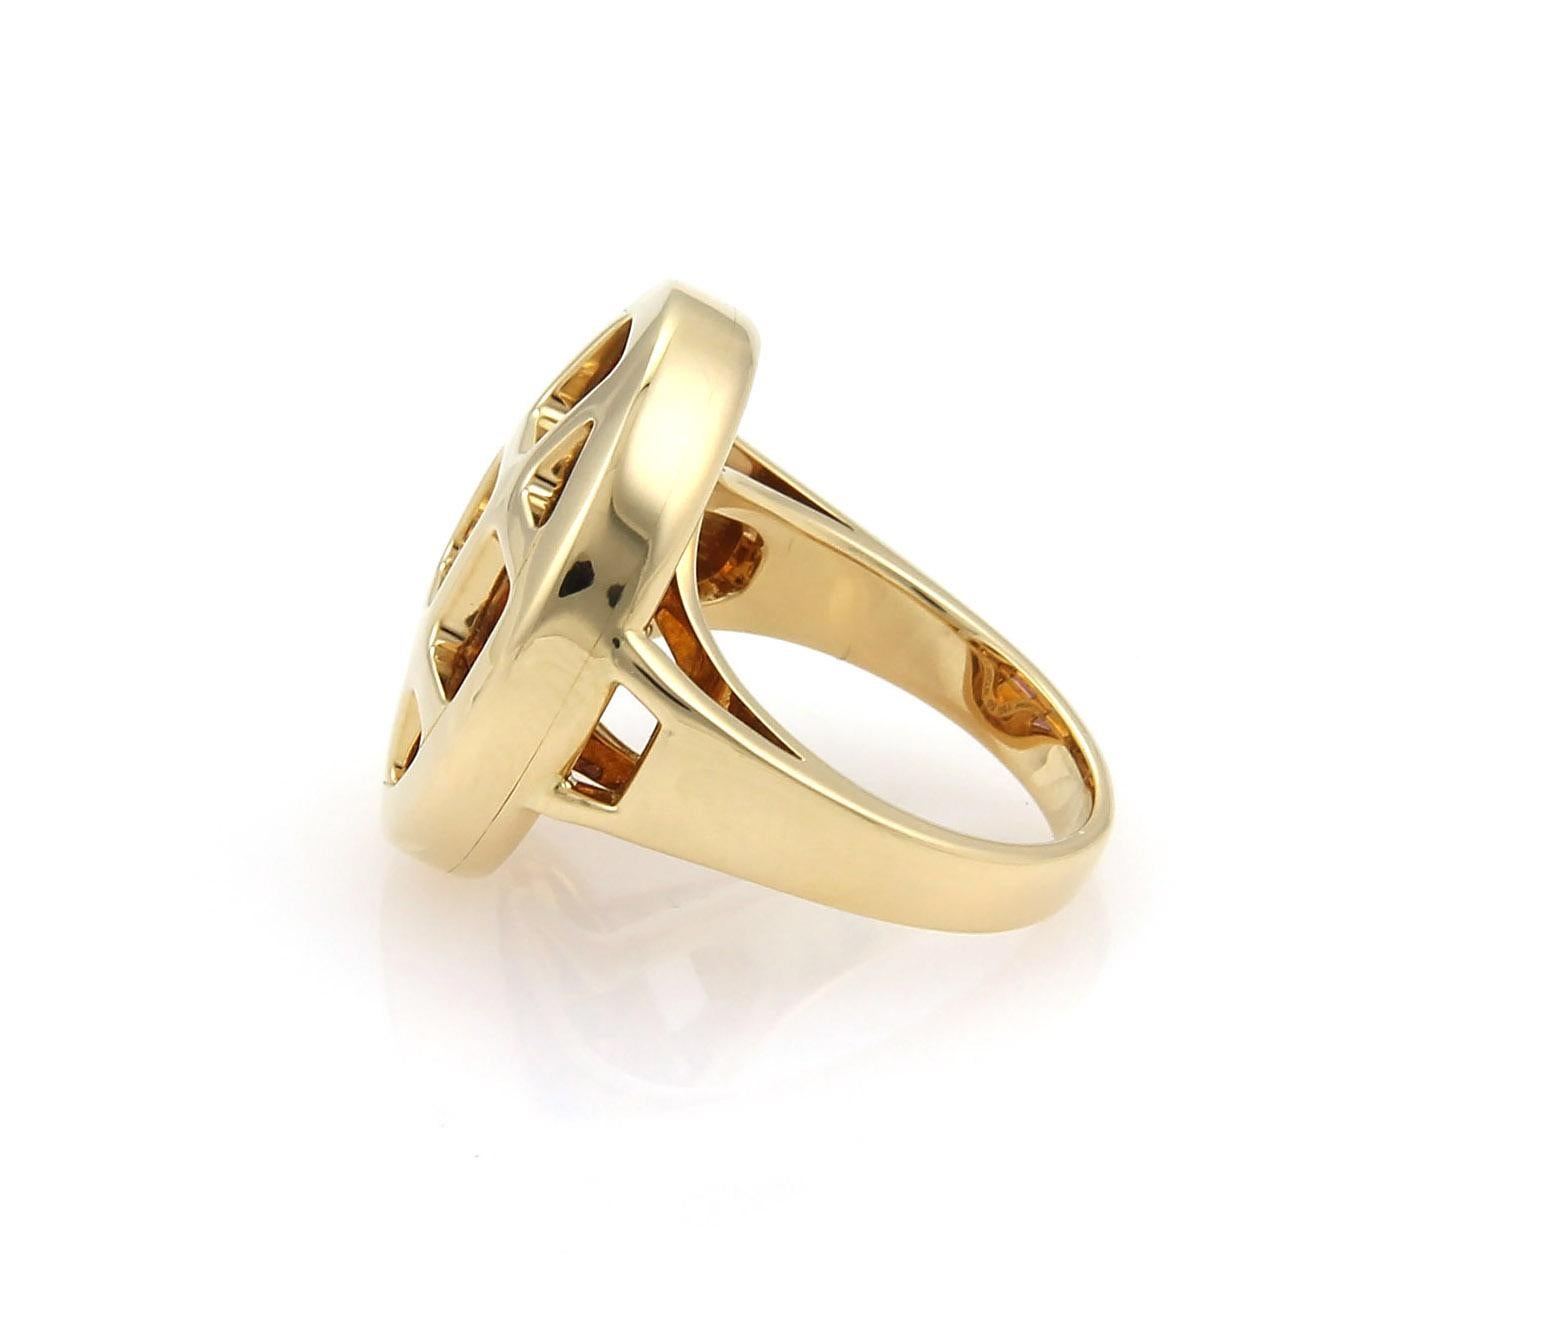 This is a lovely authentic ring by Cartier from the PASHA collection, it is crafted from 18k yellow gold in a fine polished finish. The round top has square sections, each with a color gemstone consisting of: amethyst and yellow citrine. It is fully